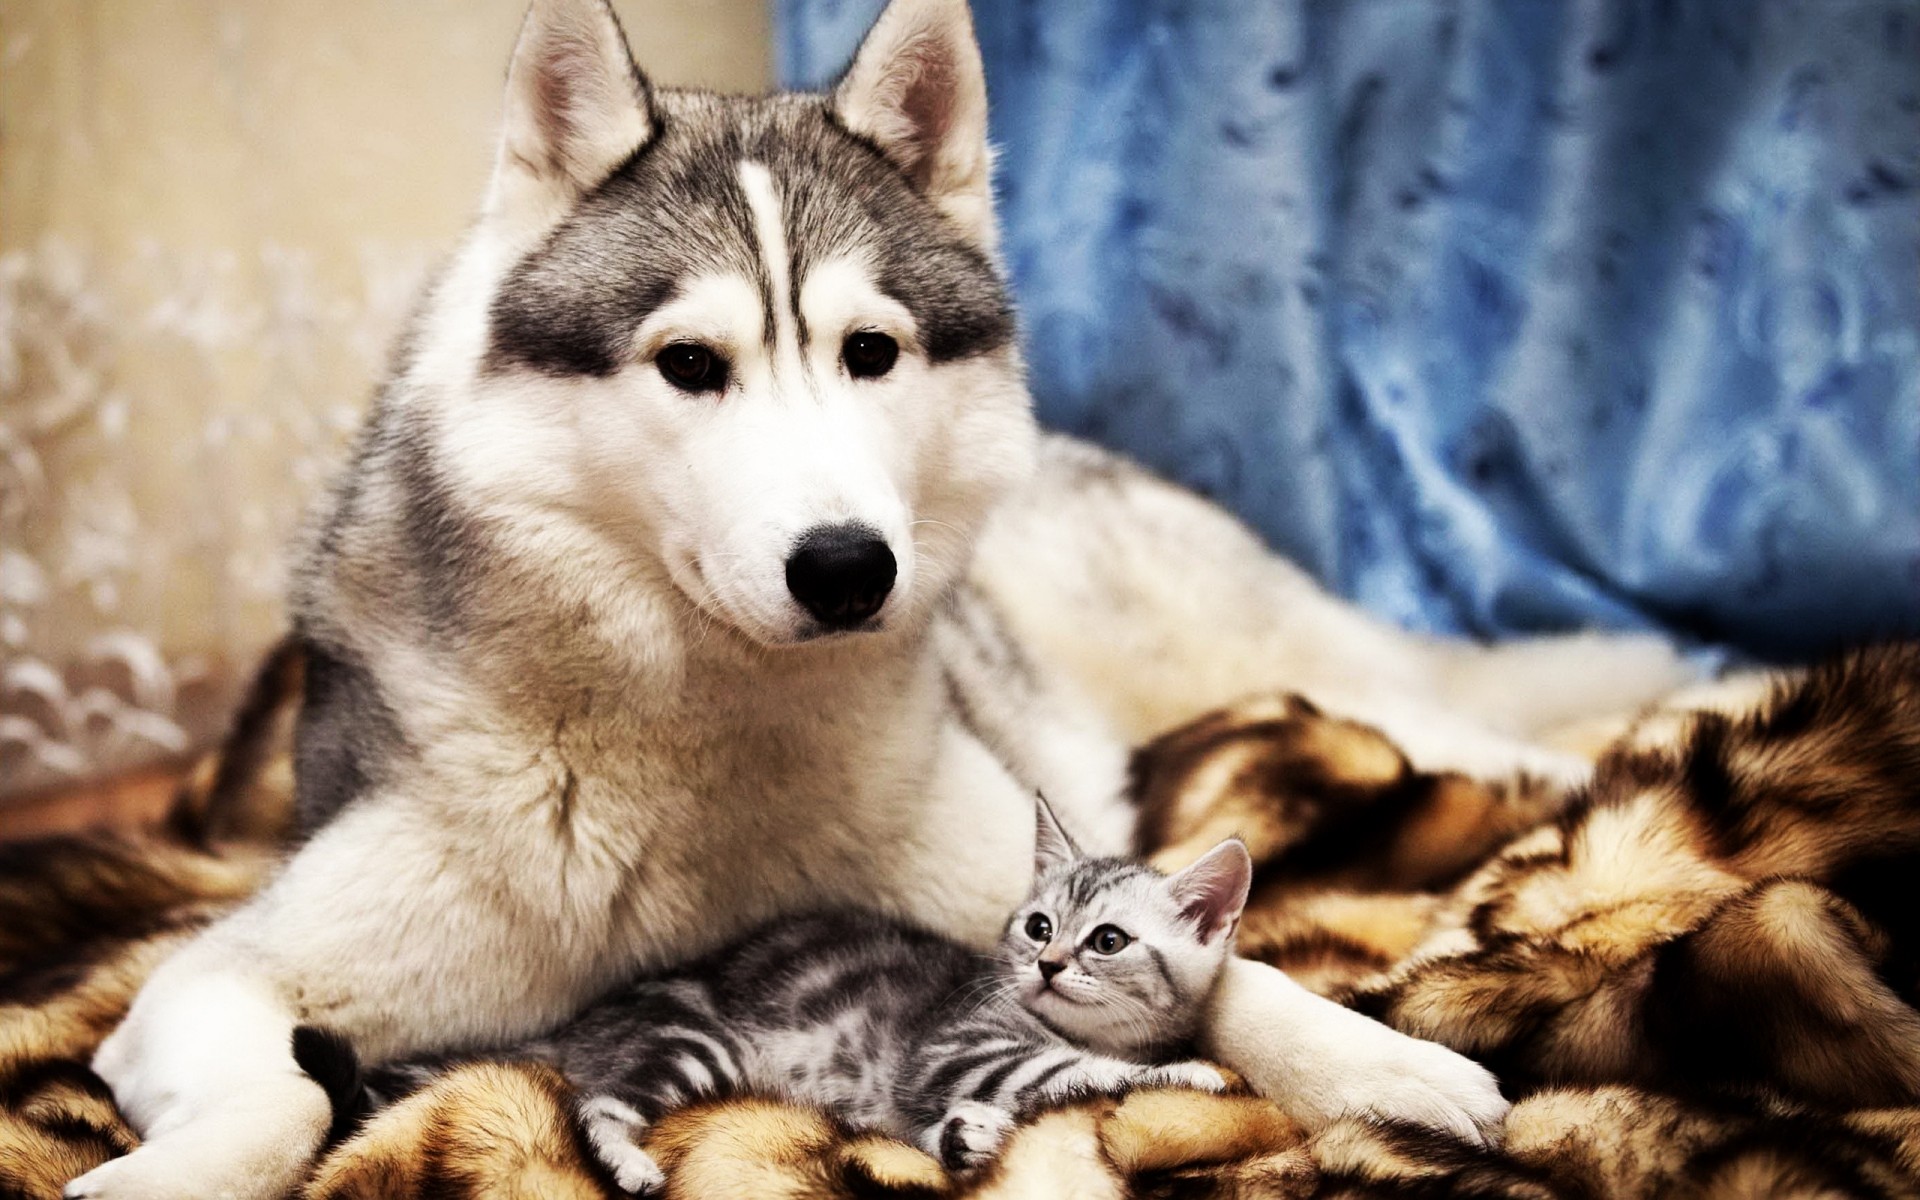 dogs animal mammal pet cute portrait dog fur domestic canine cat young siberian eye looking adorable animals funny love friendship